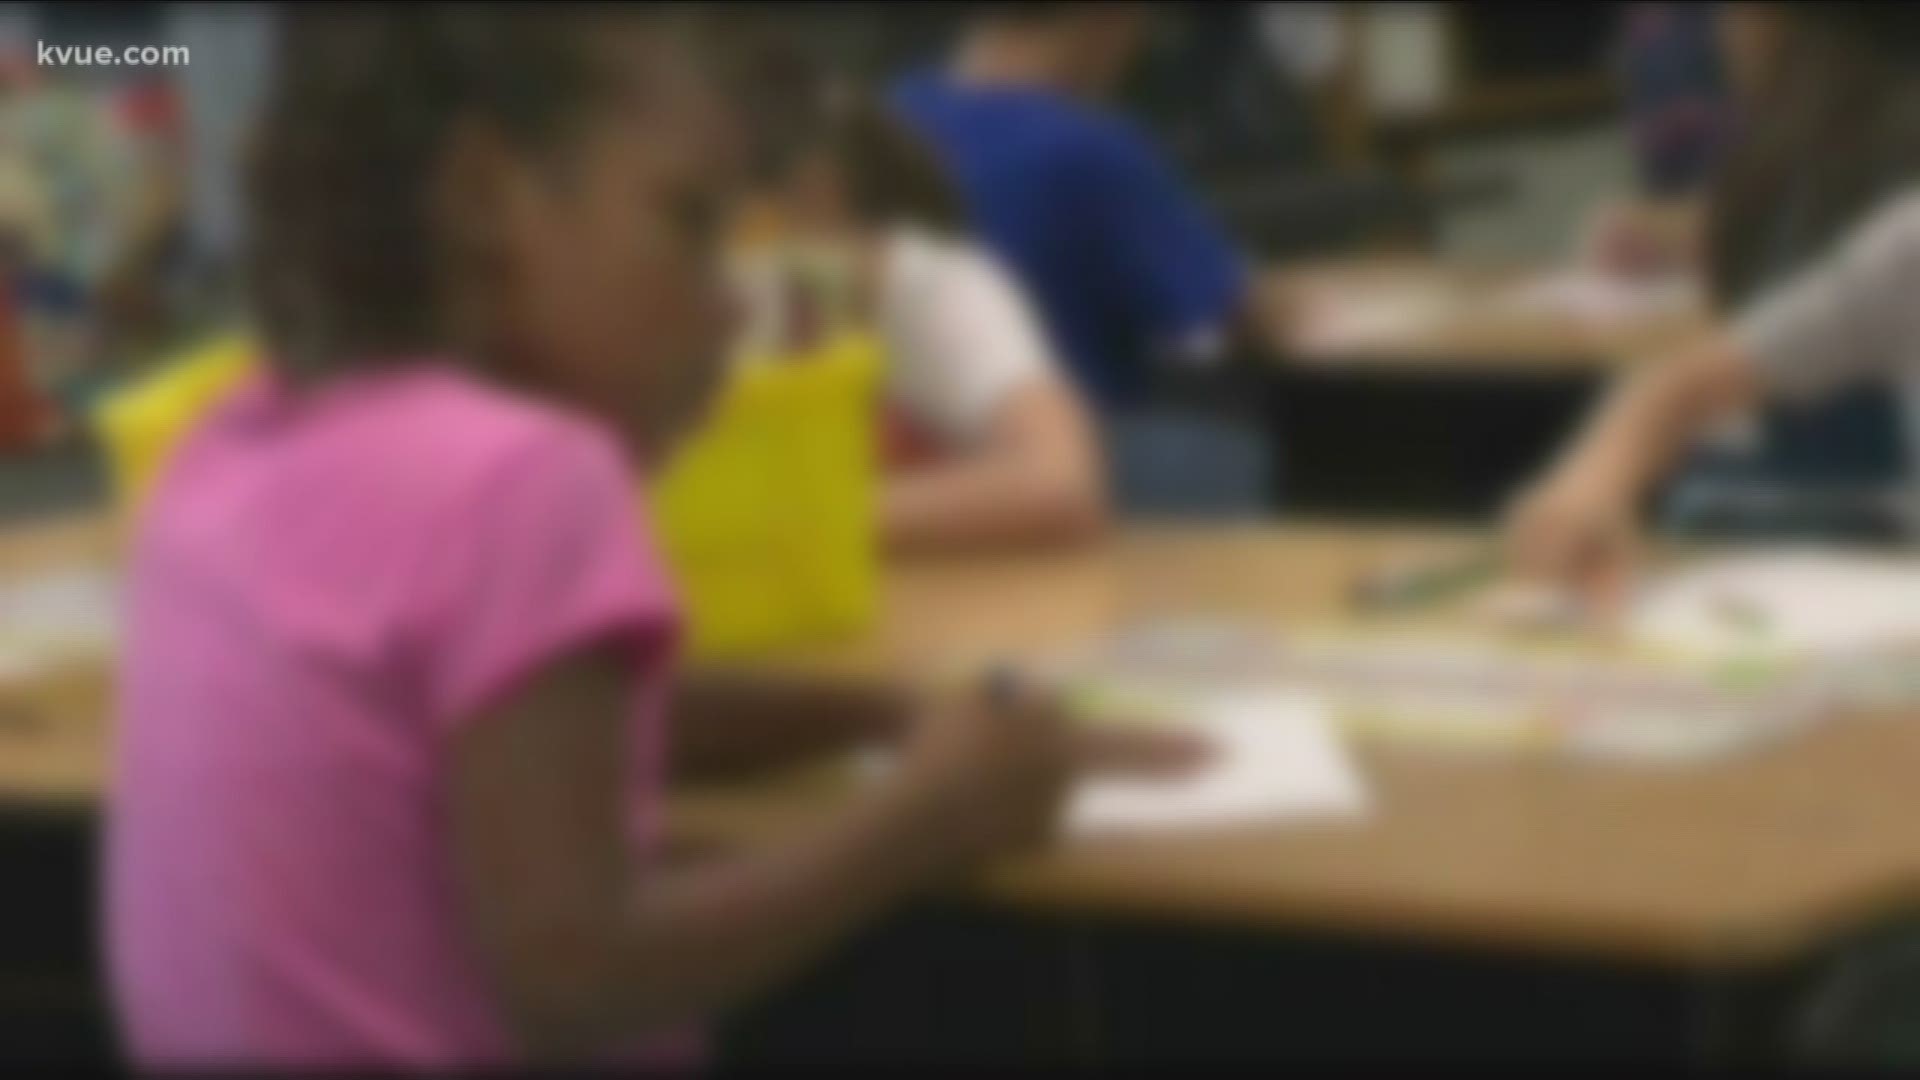 The bill would help schools deal with kids who have medical emergencies.